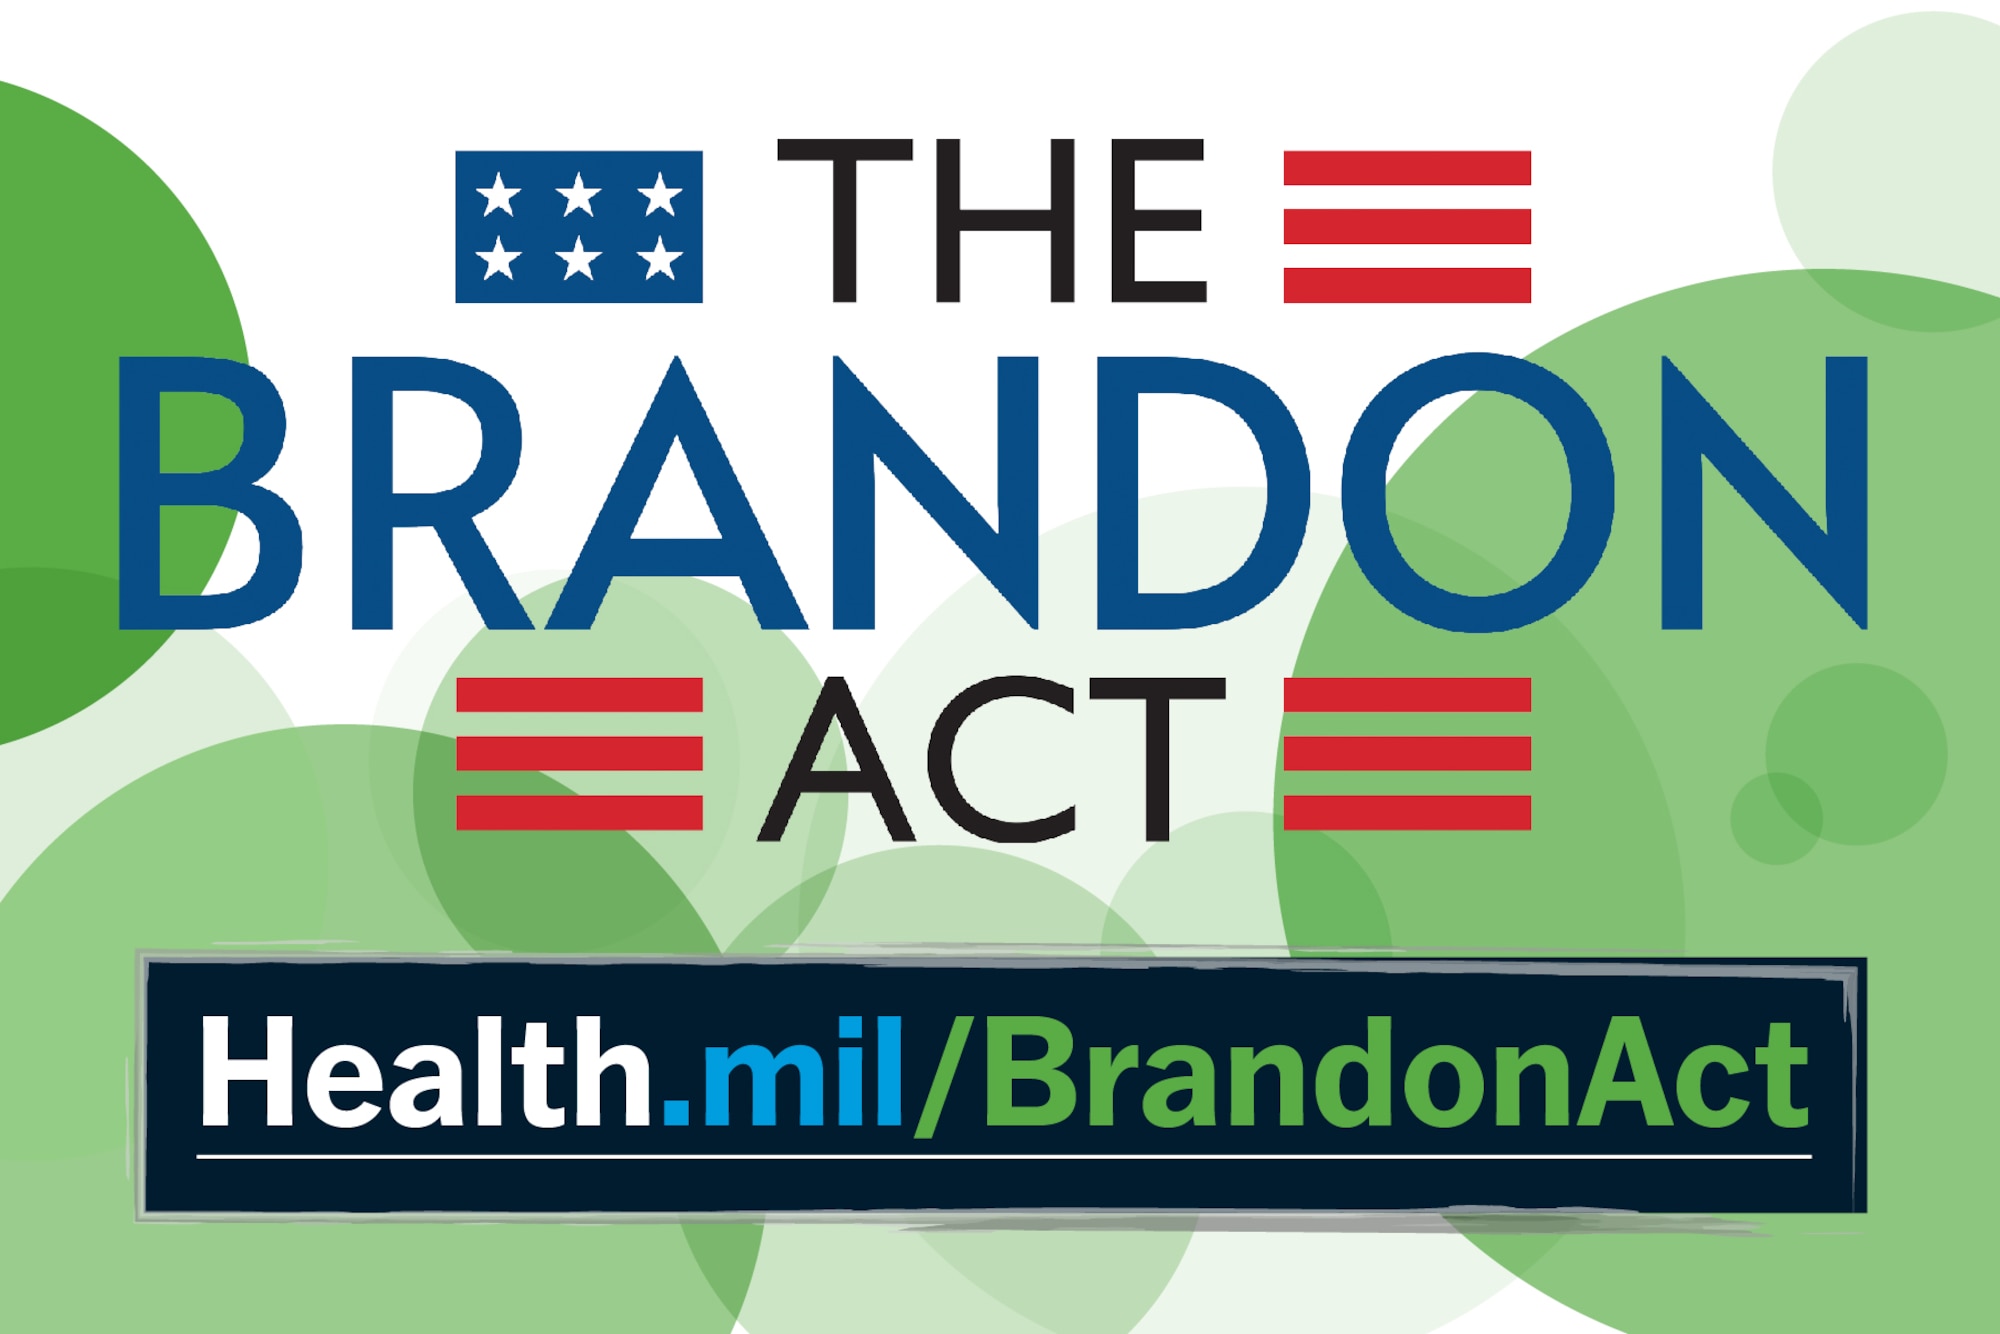 The Brandon Act written over a backround of green circles with patches of stars and stripes and the link text: Health.mil/BrandonAct.